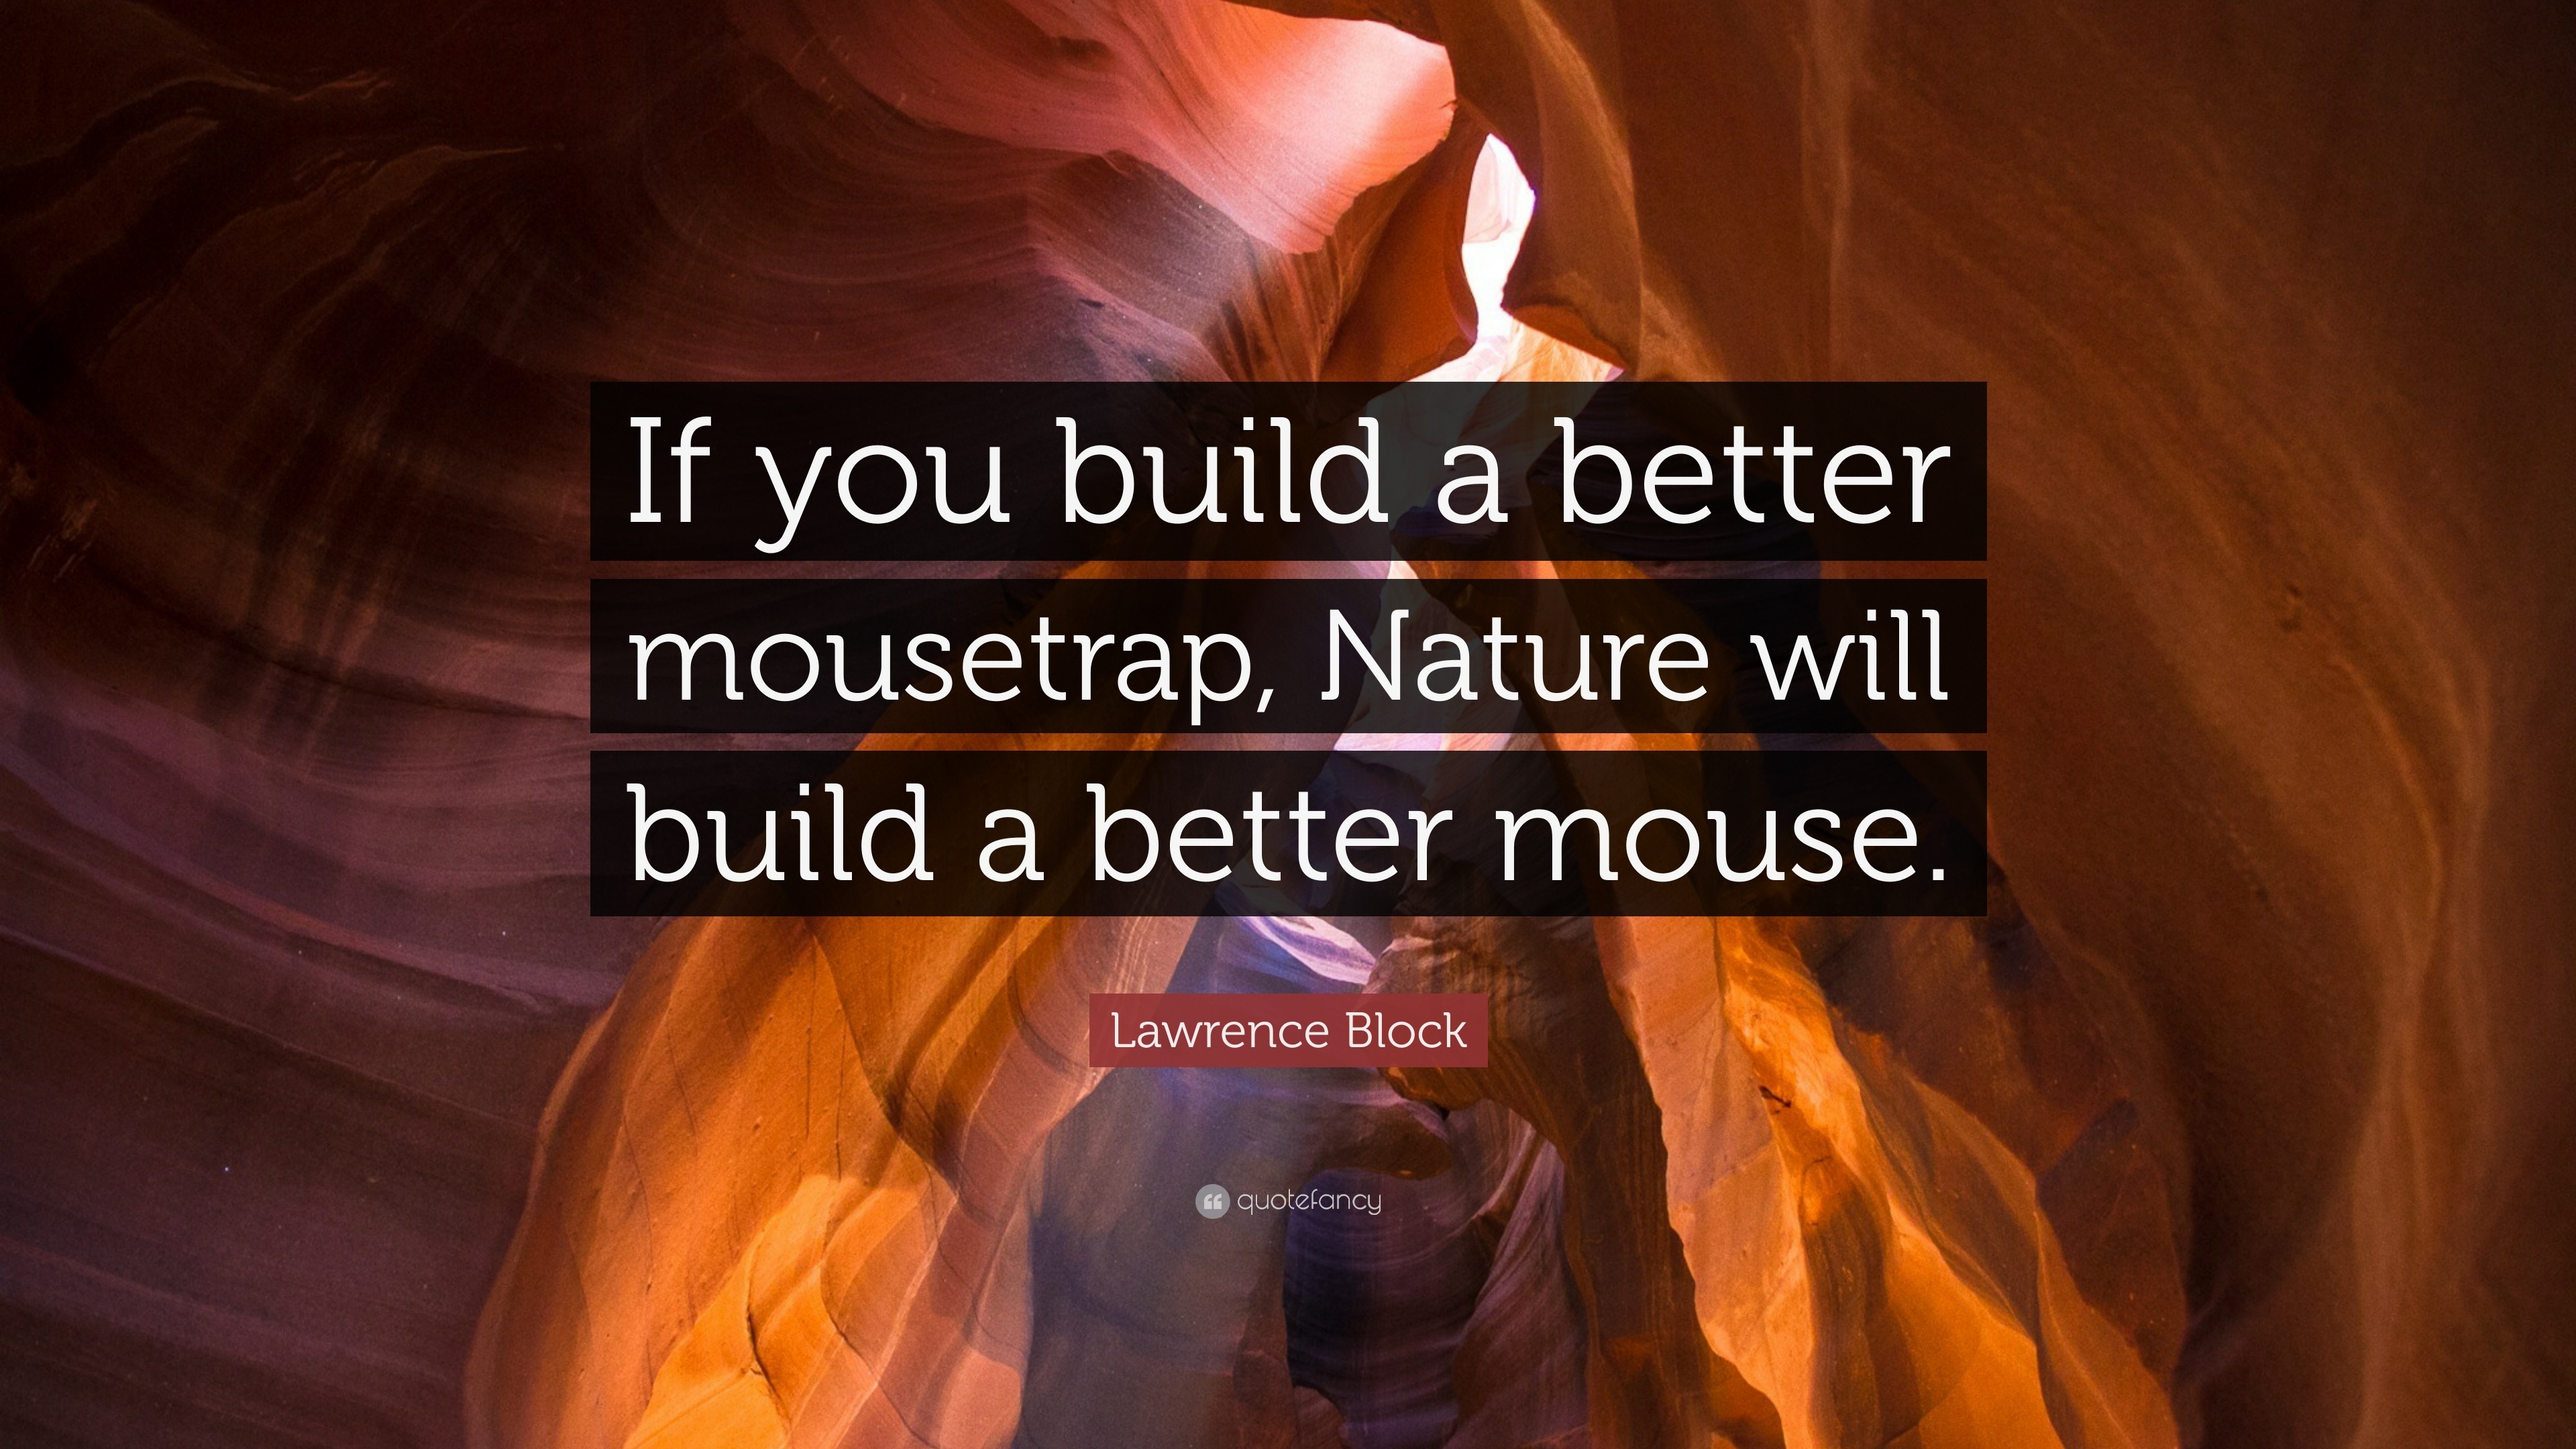 https://quotefancy.com/media/wallpaper/3840x2160/854290-Lawrence-Block-Quote-If-you-build-a-better-mousetrap-Nature-will.jpg